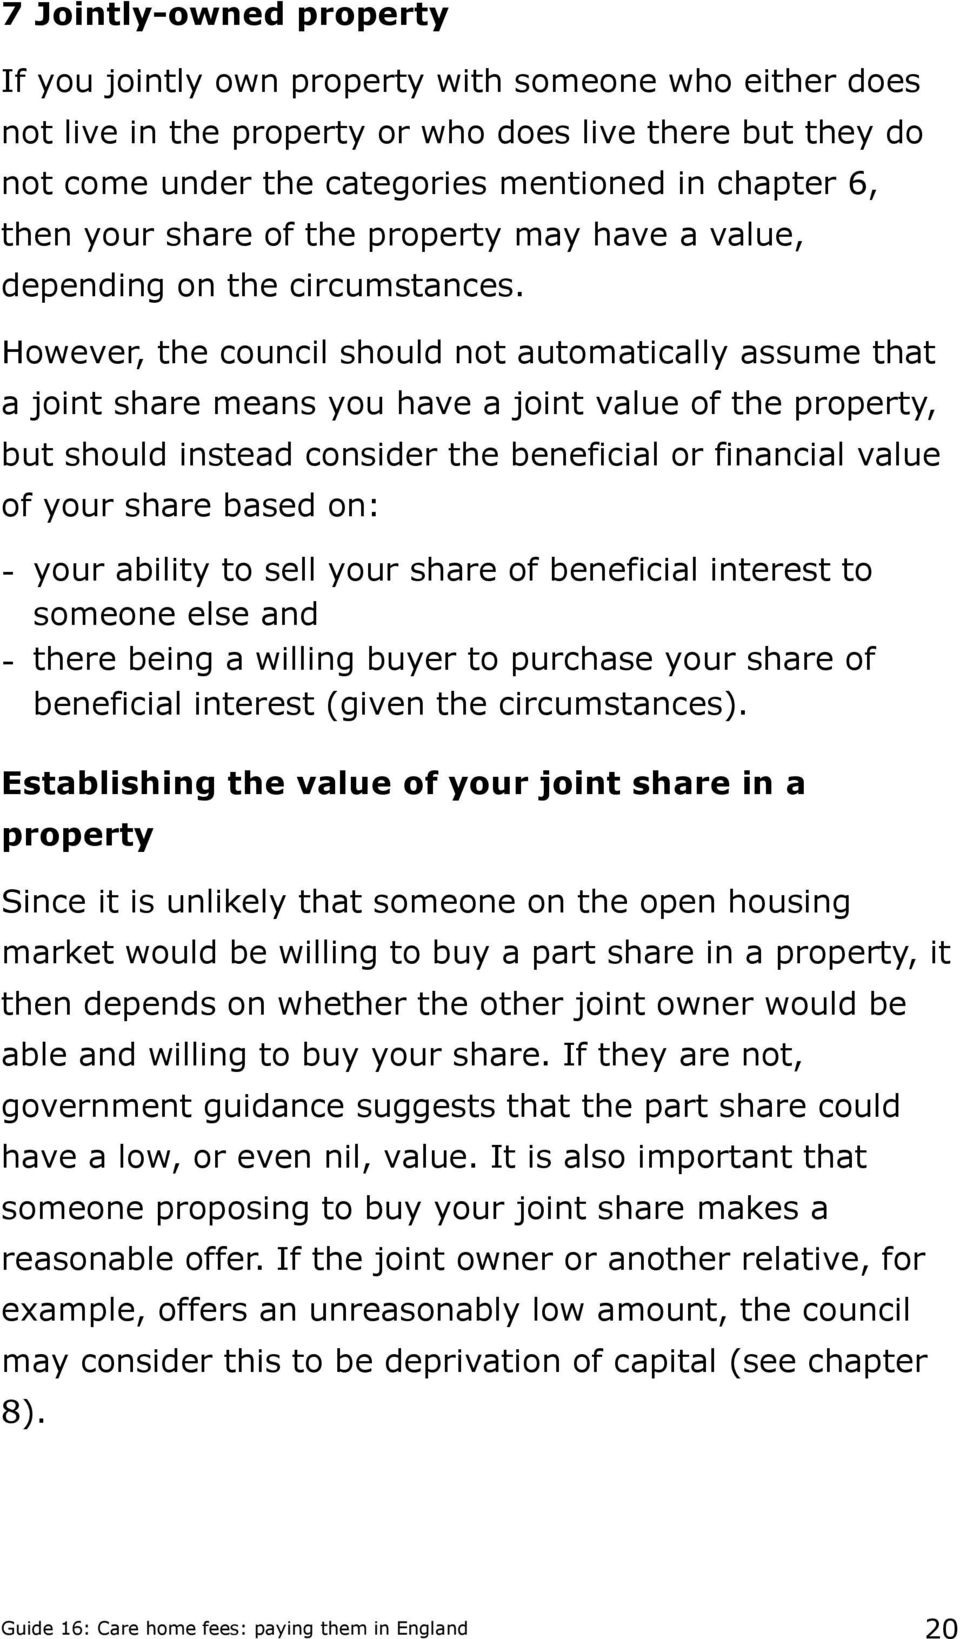 However, the council should not automatically assume that a joint share means you have a joint value of the property, but should instead consider the beneficial or financial value of your share based